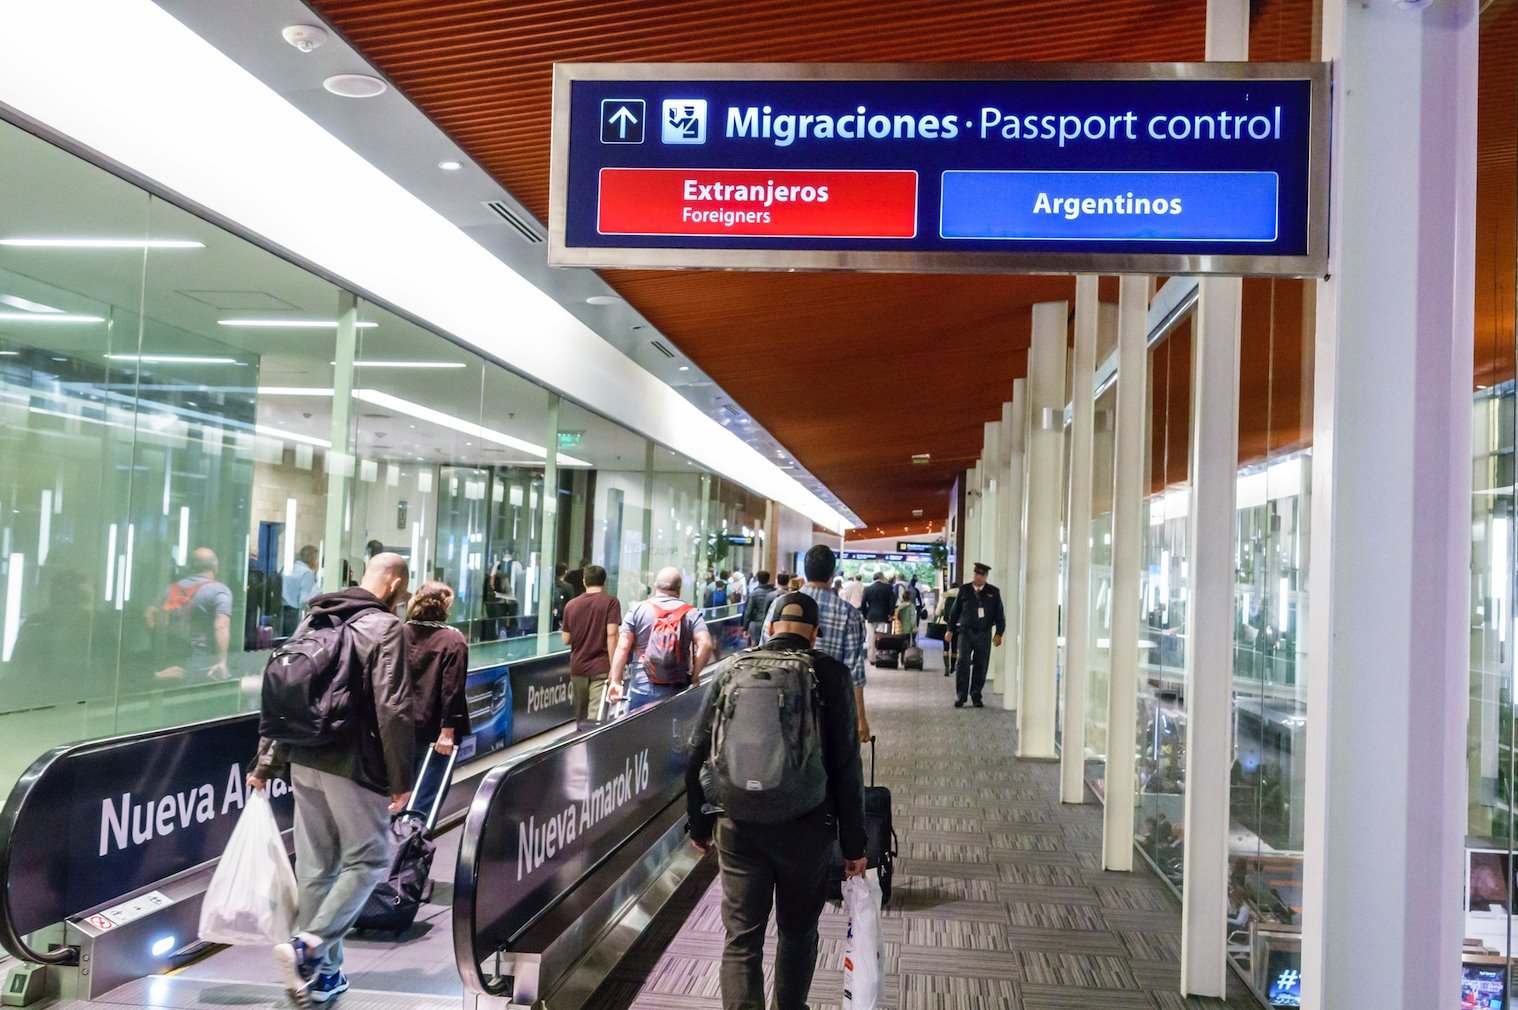 Passengers arriving at Ezeiza airport in Buenos Aires